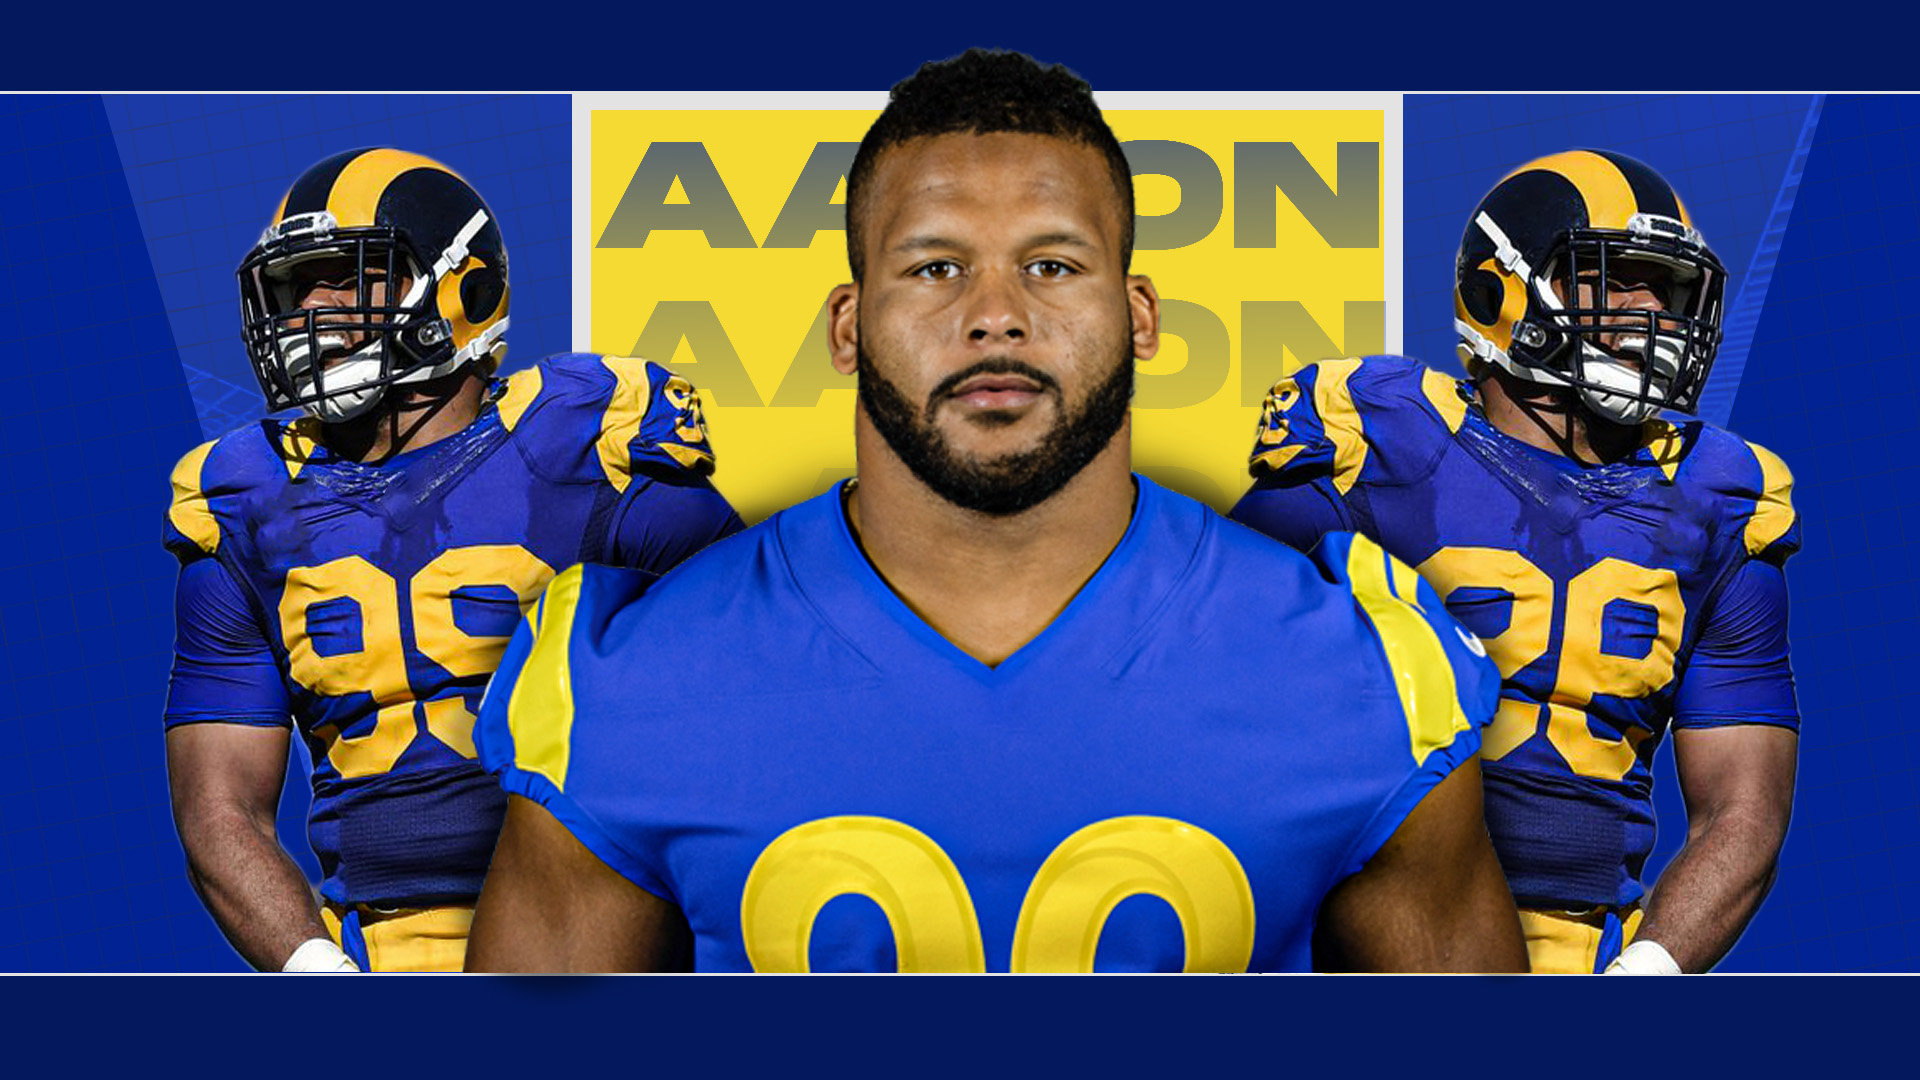 Aaron Donald's net worth, investments and sponsorships